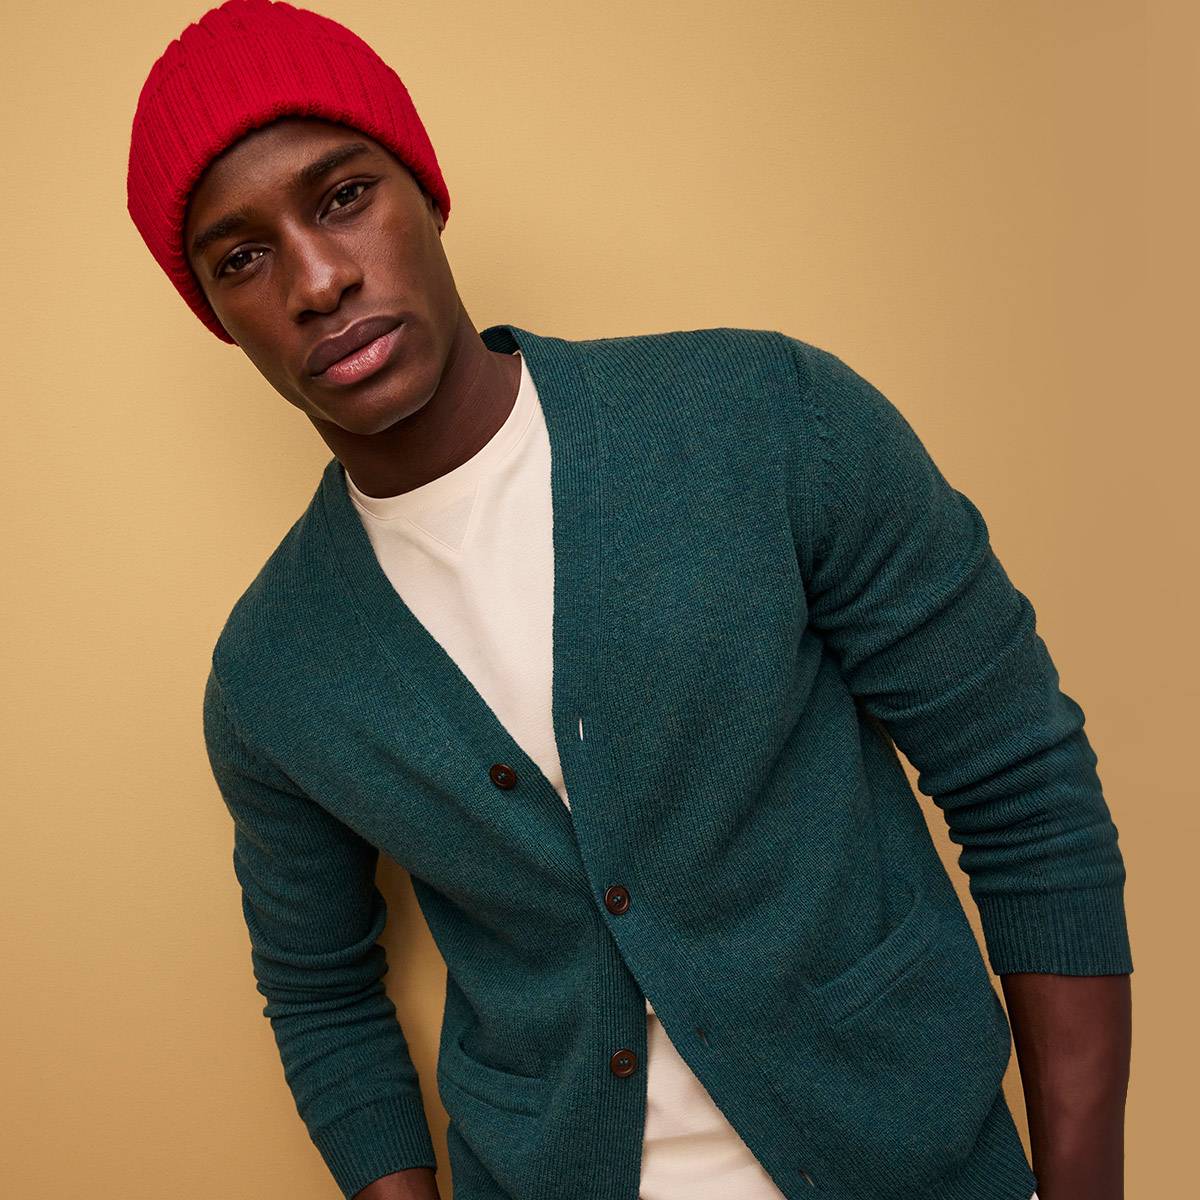 Man wearing green cardigan, white T-shirt, beige chinos and red beanie. Shop gifts for him